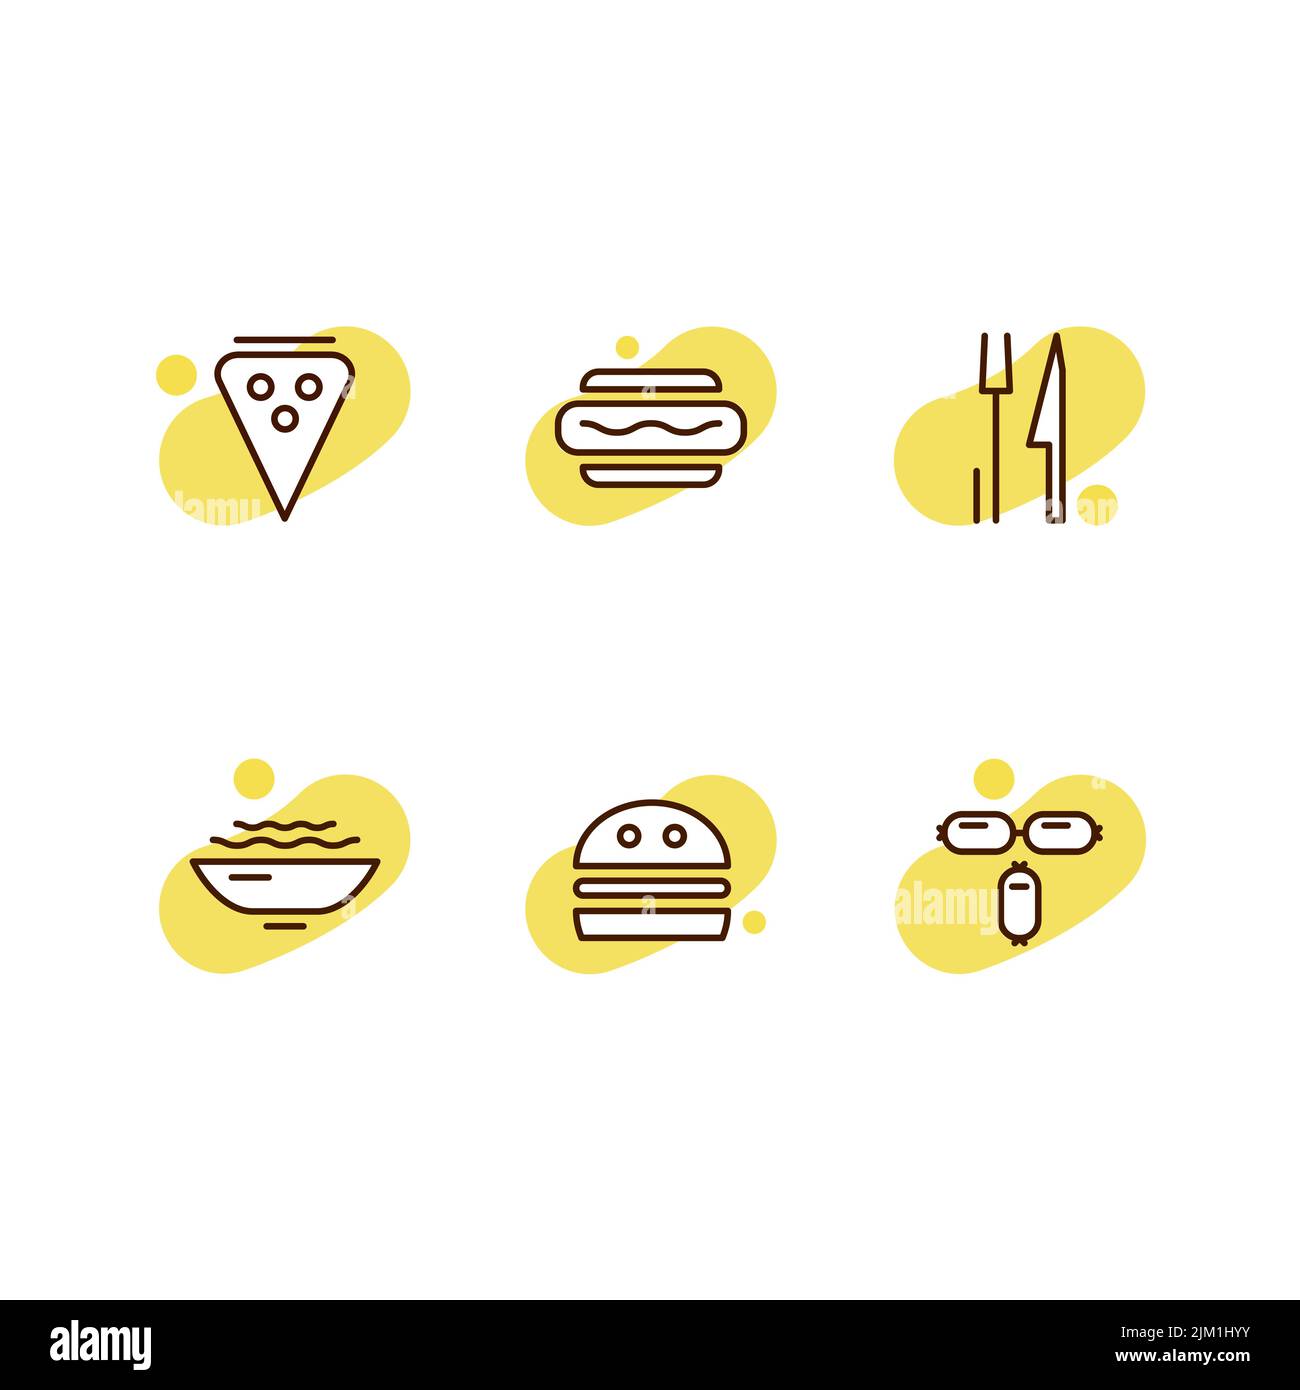 Set of vector icons on the theme of meat. Brown stroke and yellow background at each icon. Stock Vector